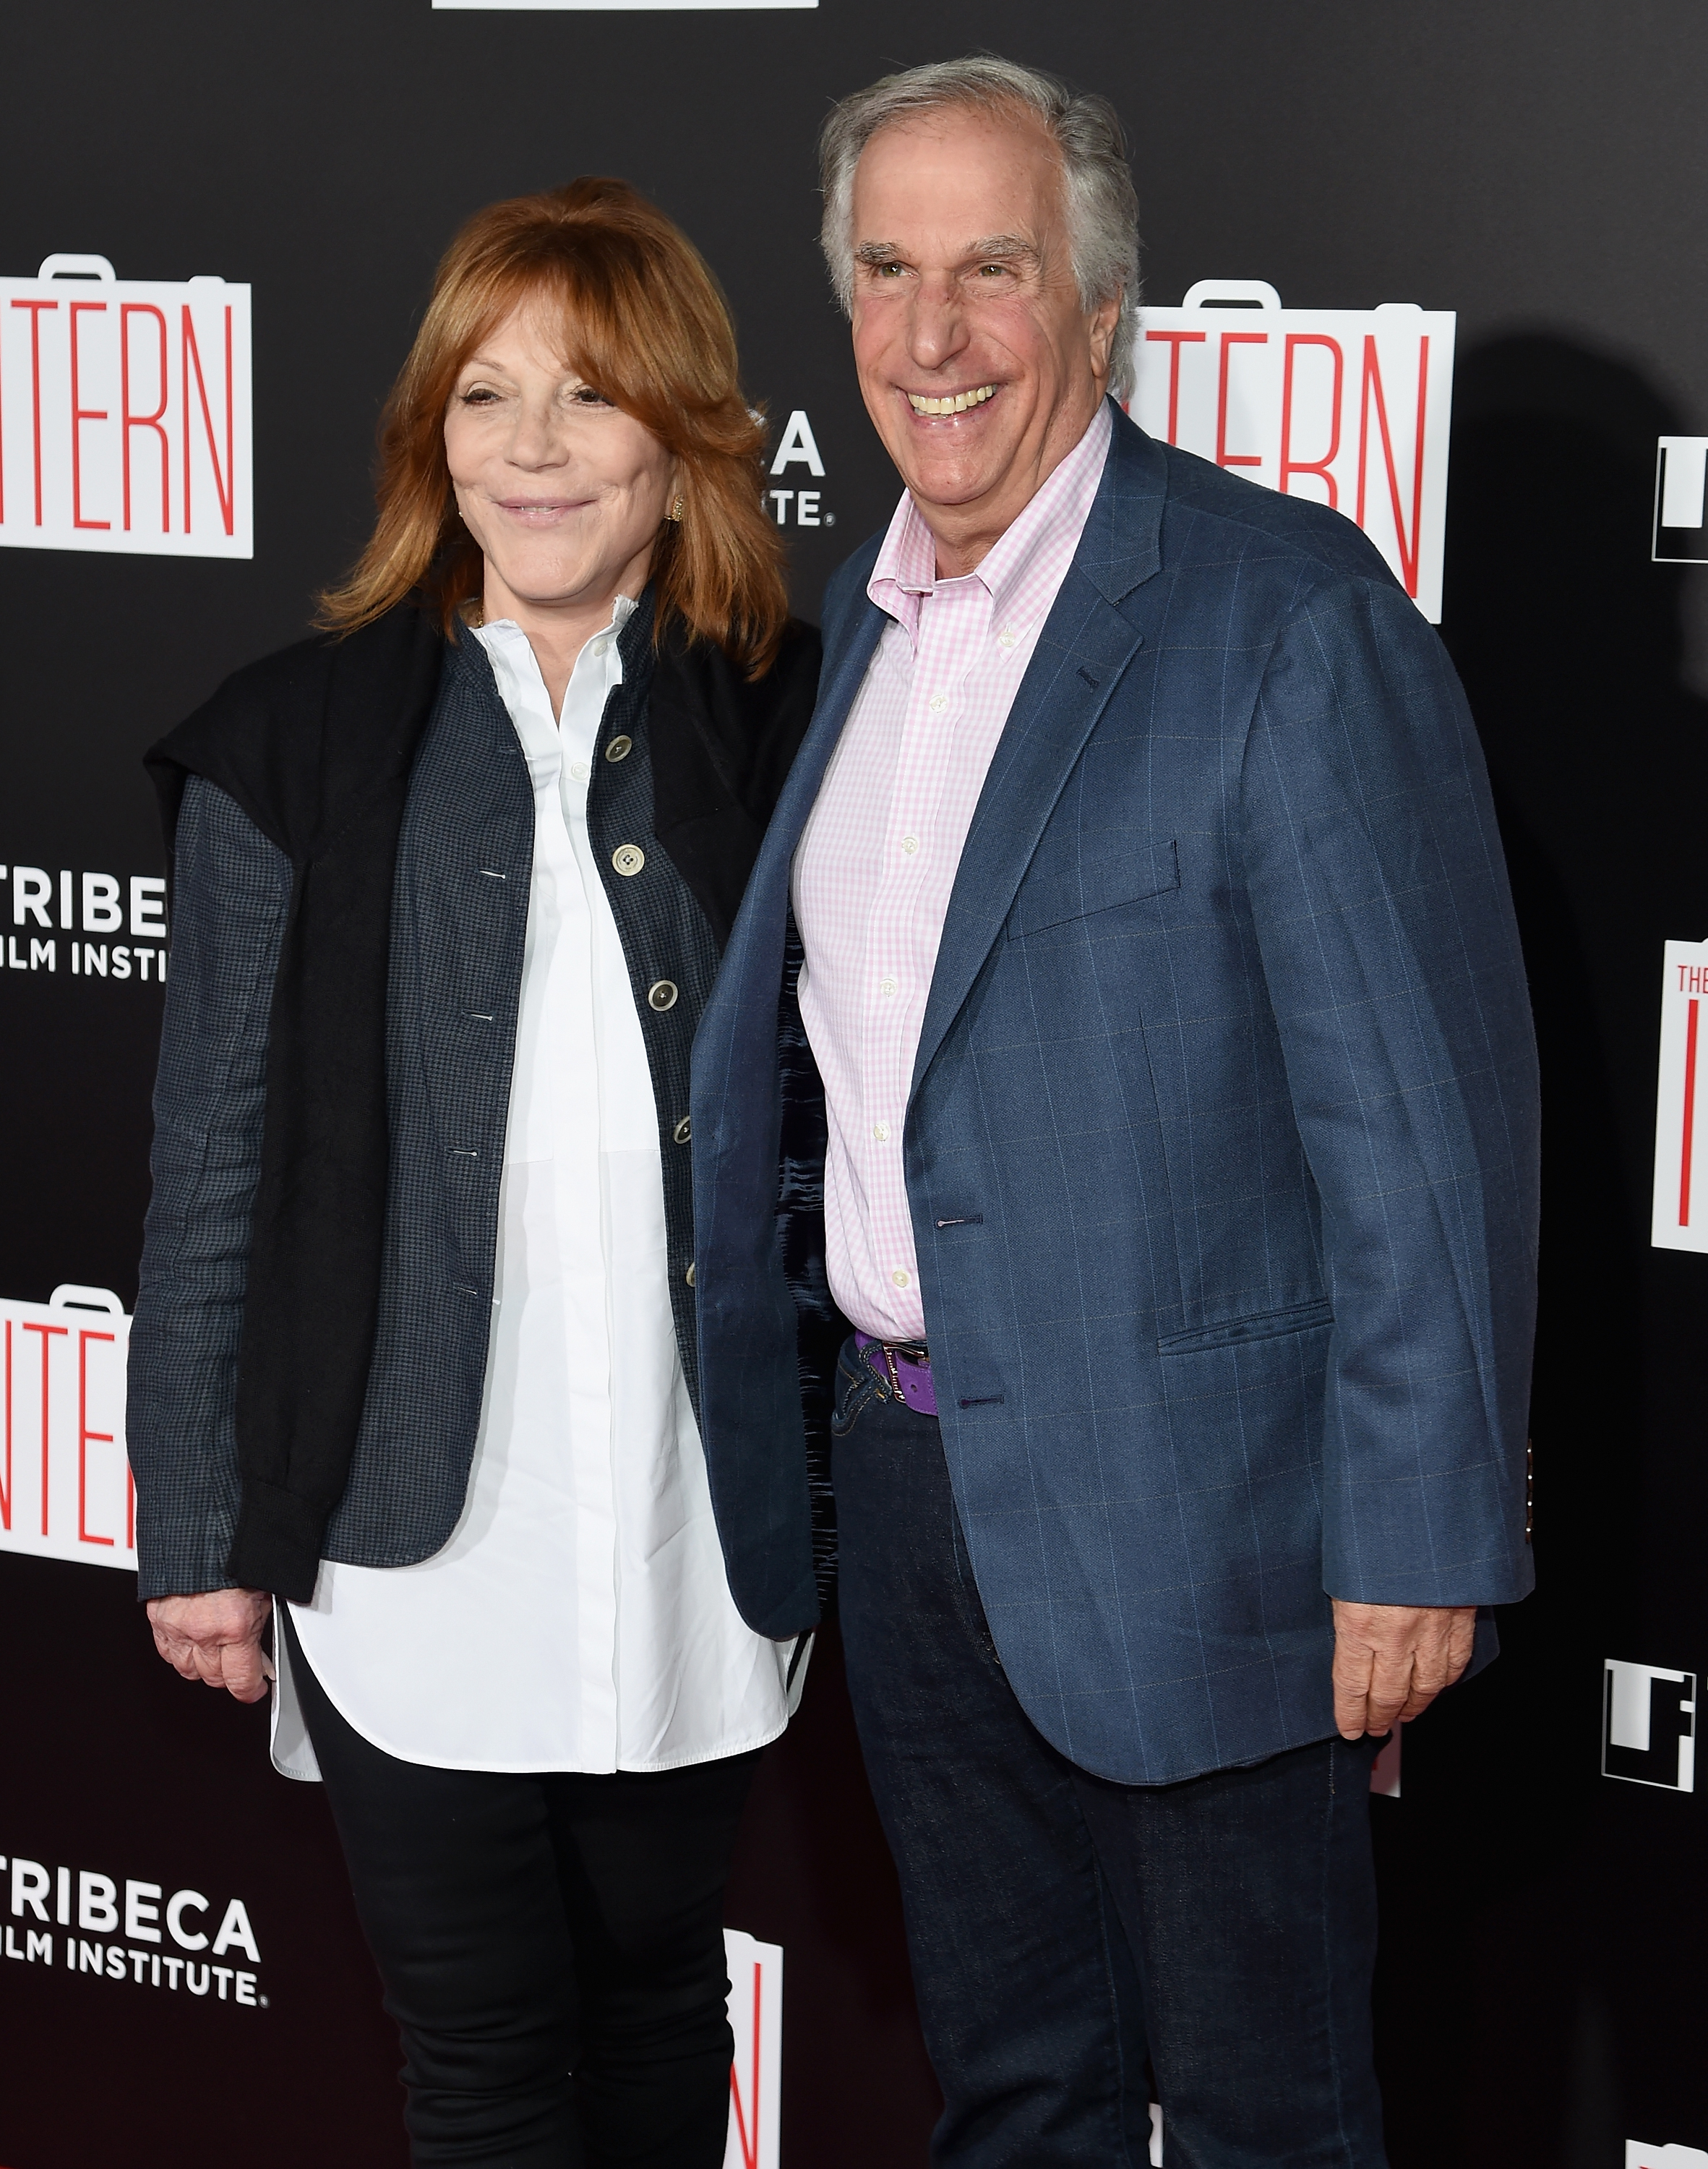 Stacey Weitzman and Henry Winkler at the New York premiere of "The Intern" on September 21, 2015 | Source: Getty Images